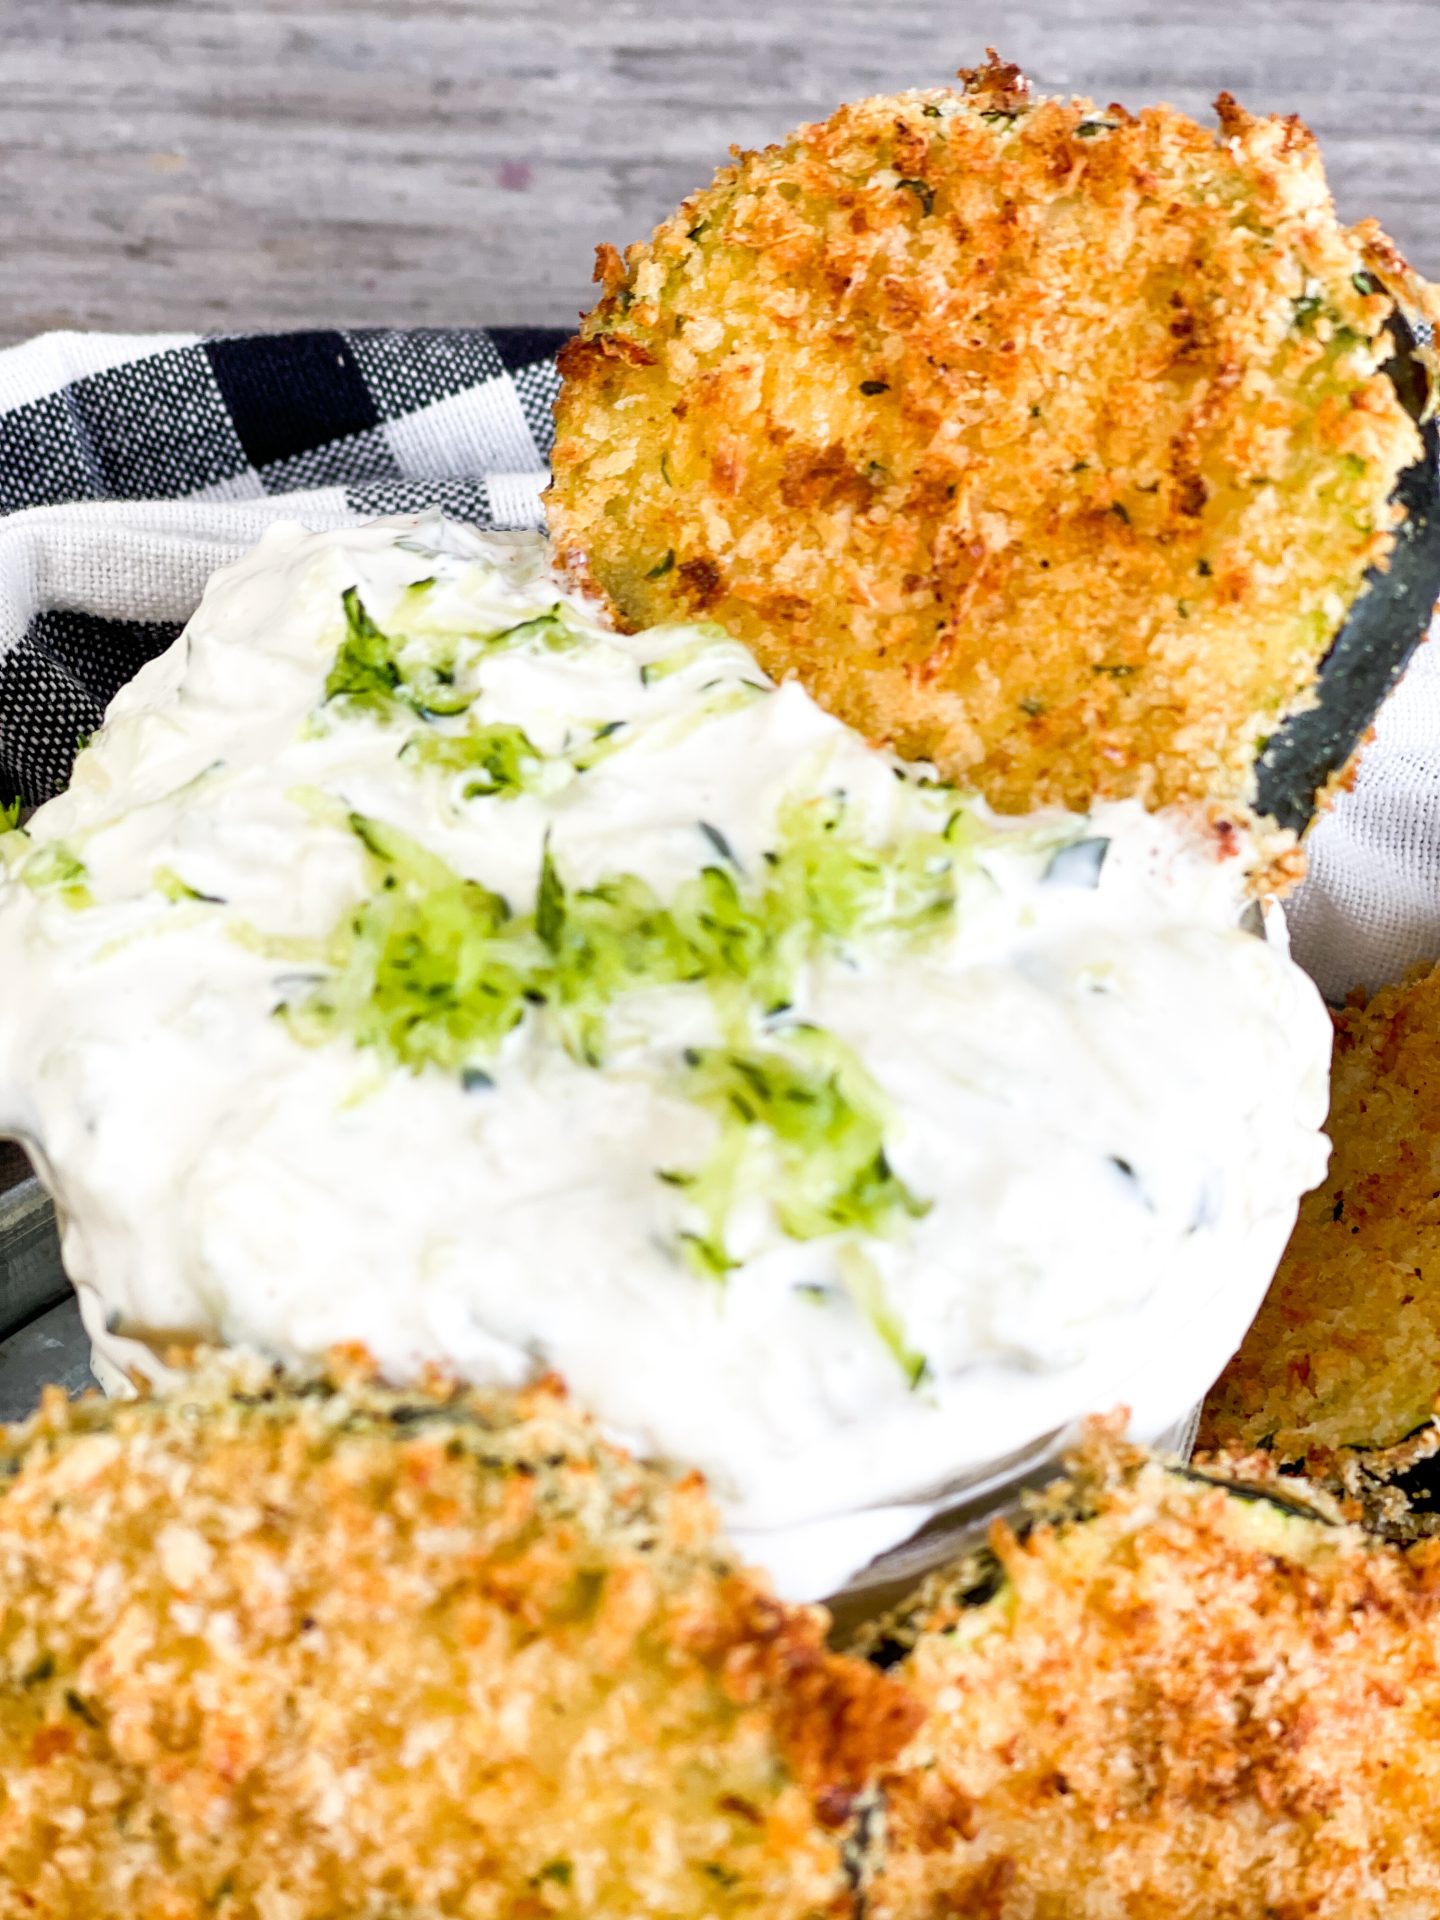 Air Fryer Breaded Zucchini Chips and Creamy Cucumber Dip from Farmwife Feeds. All the yumminess and crispiness of a traditional fried zucchini buy no deep frying! #friedzucchini #zucchini #gardenproduce